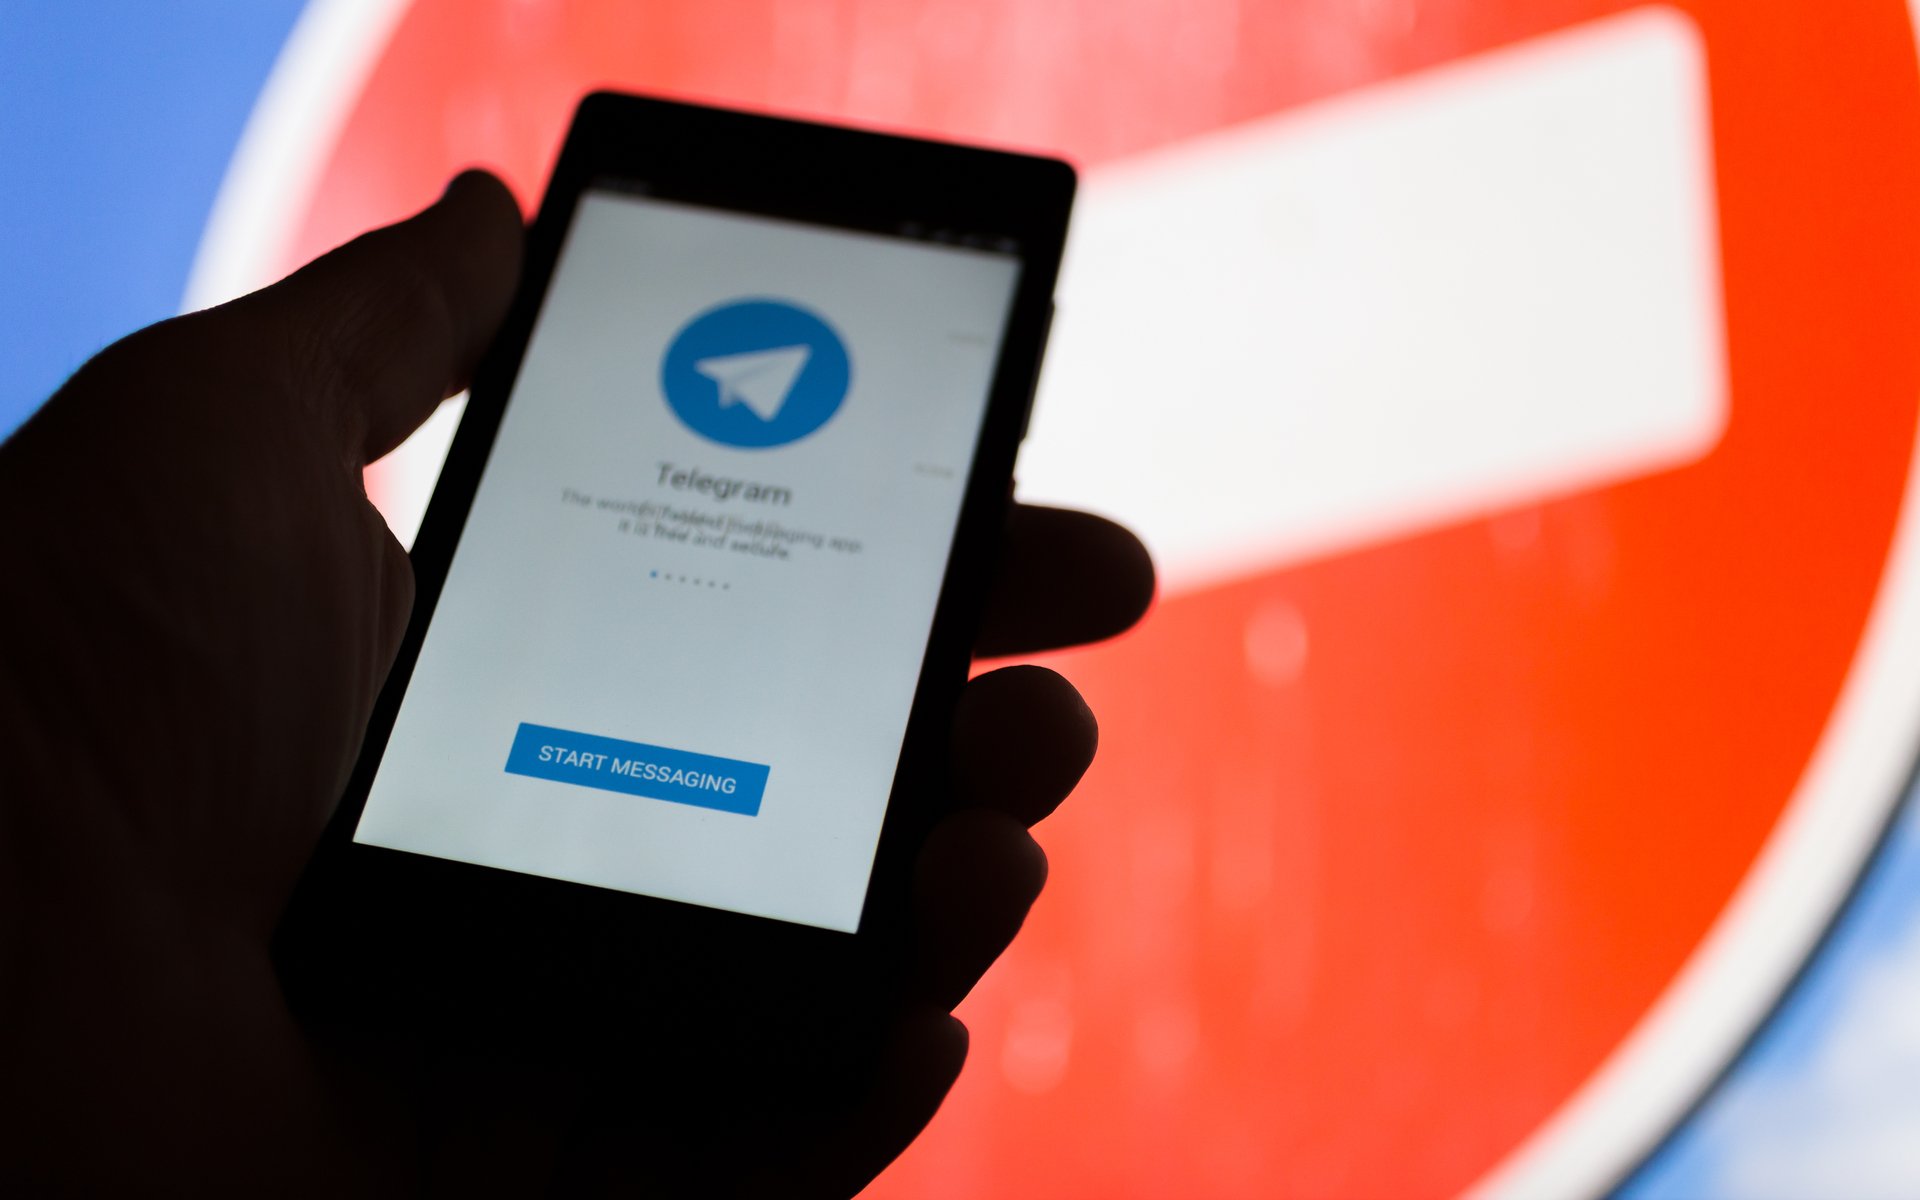 Russia Blocked Telegram Because Crypto Is ‘Uncontrollable,’ Says FSB Memo